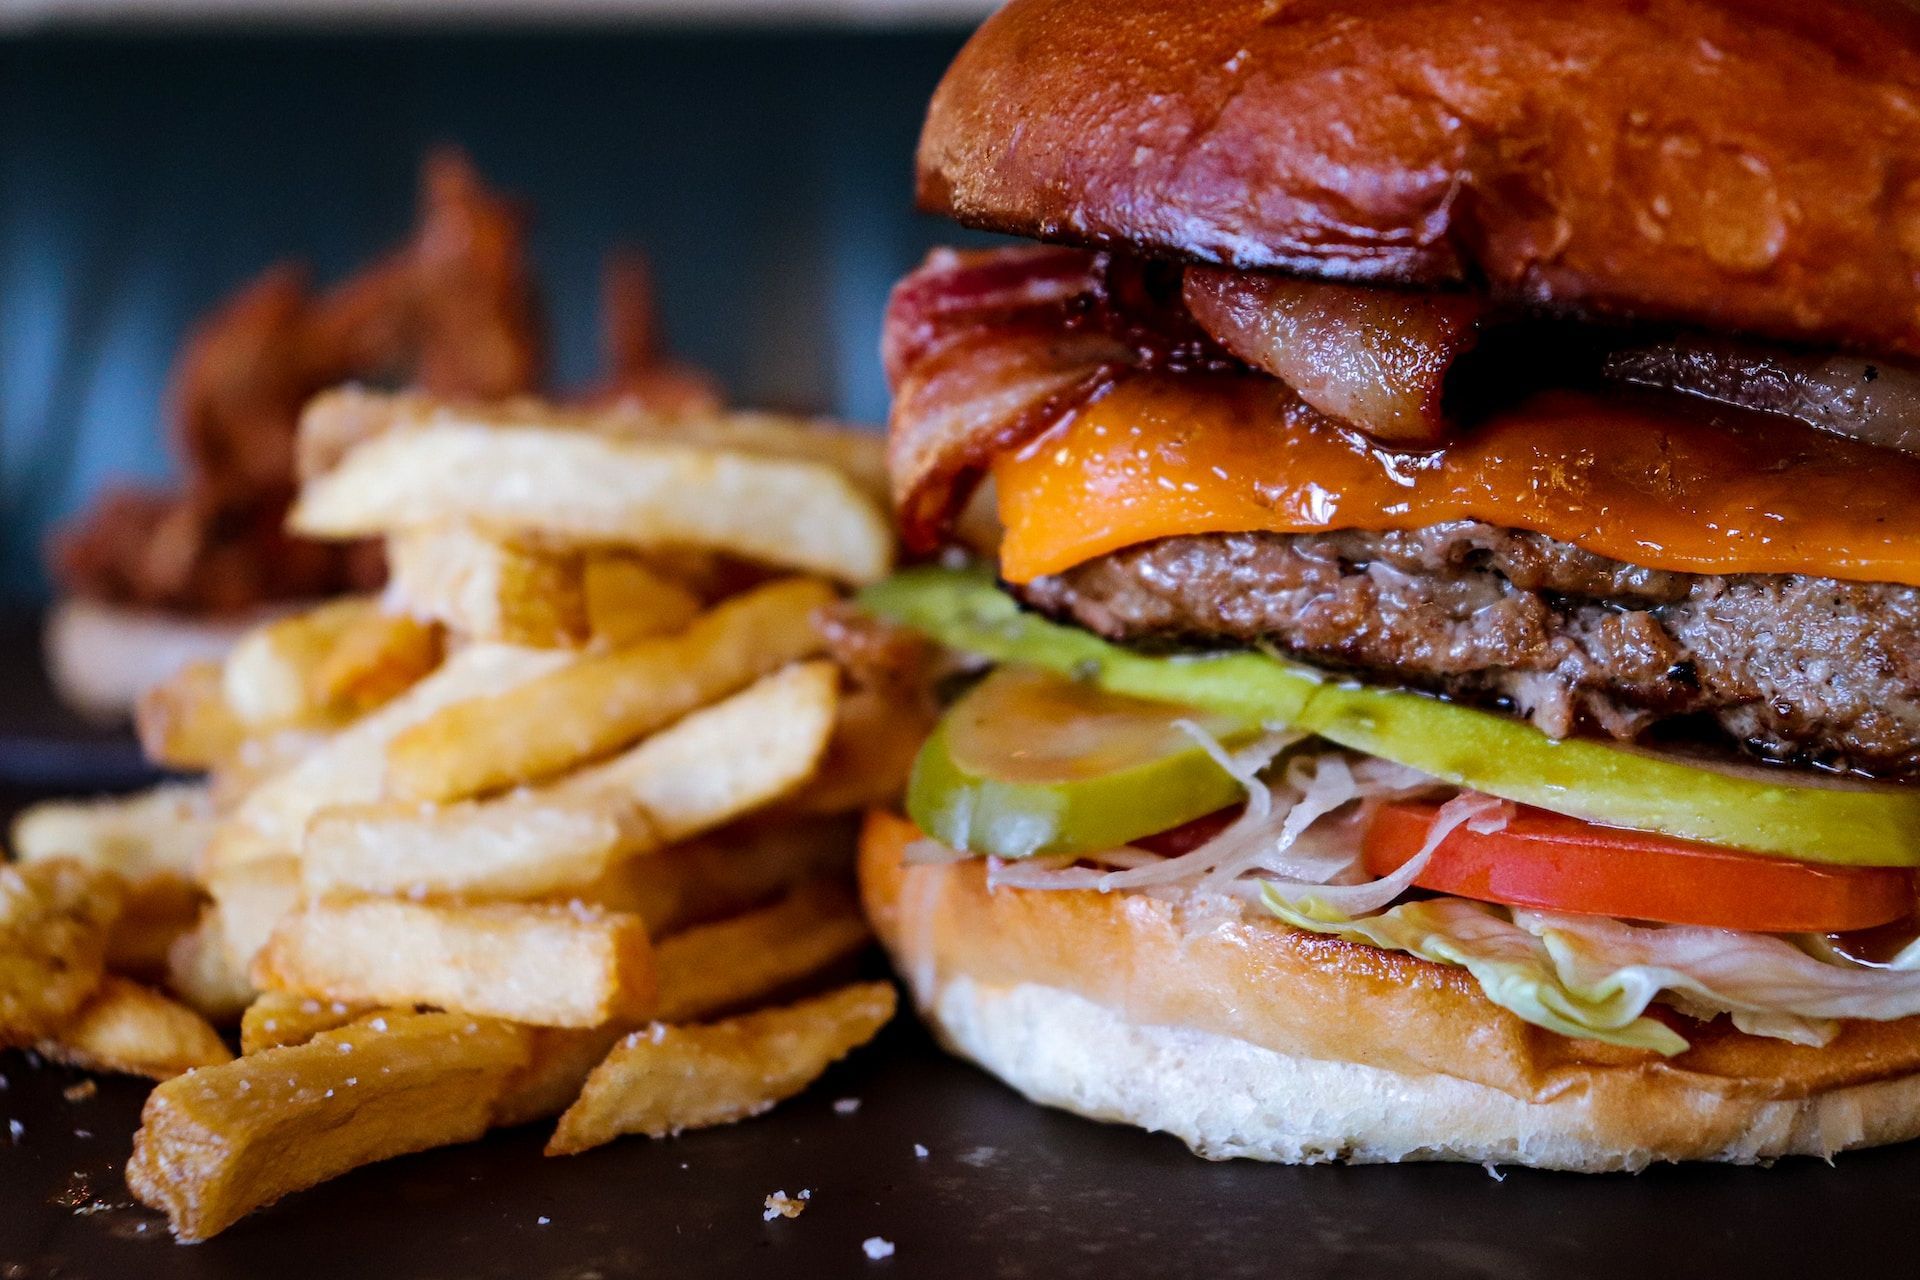 A close up of a hamburger and french fries on a table.